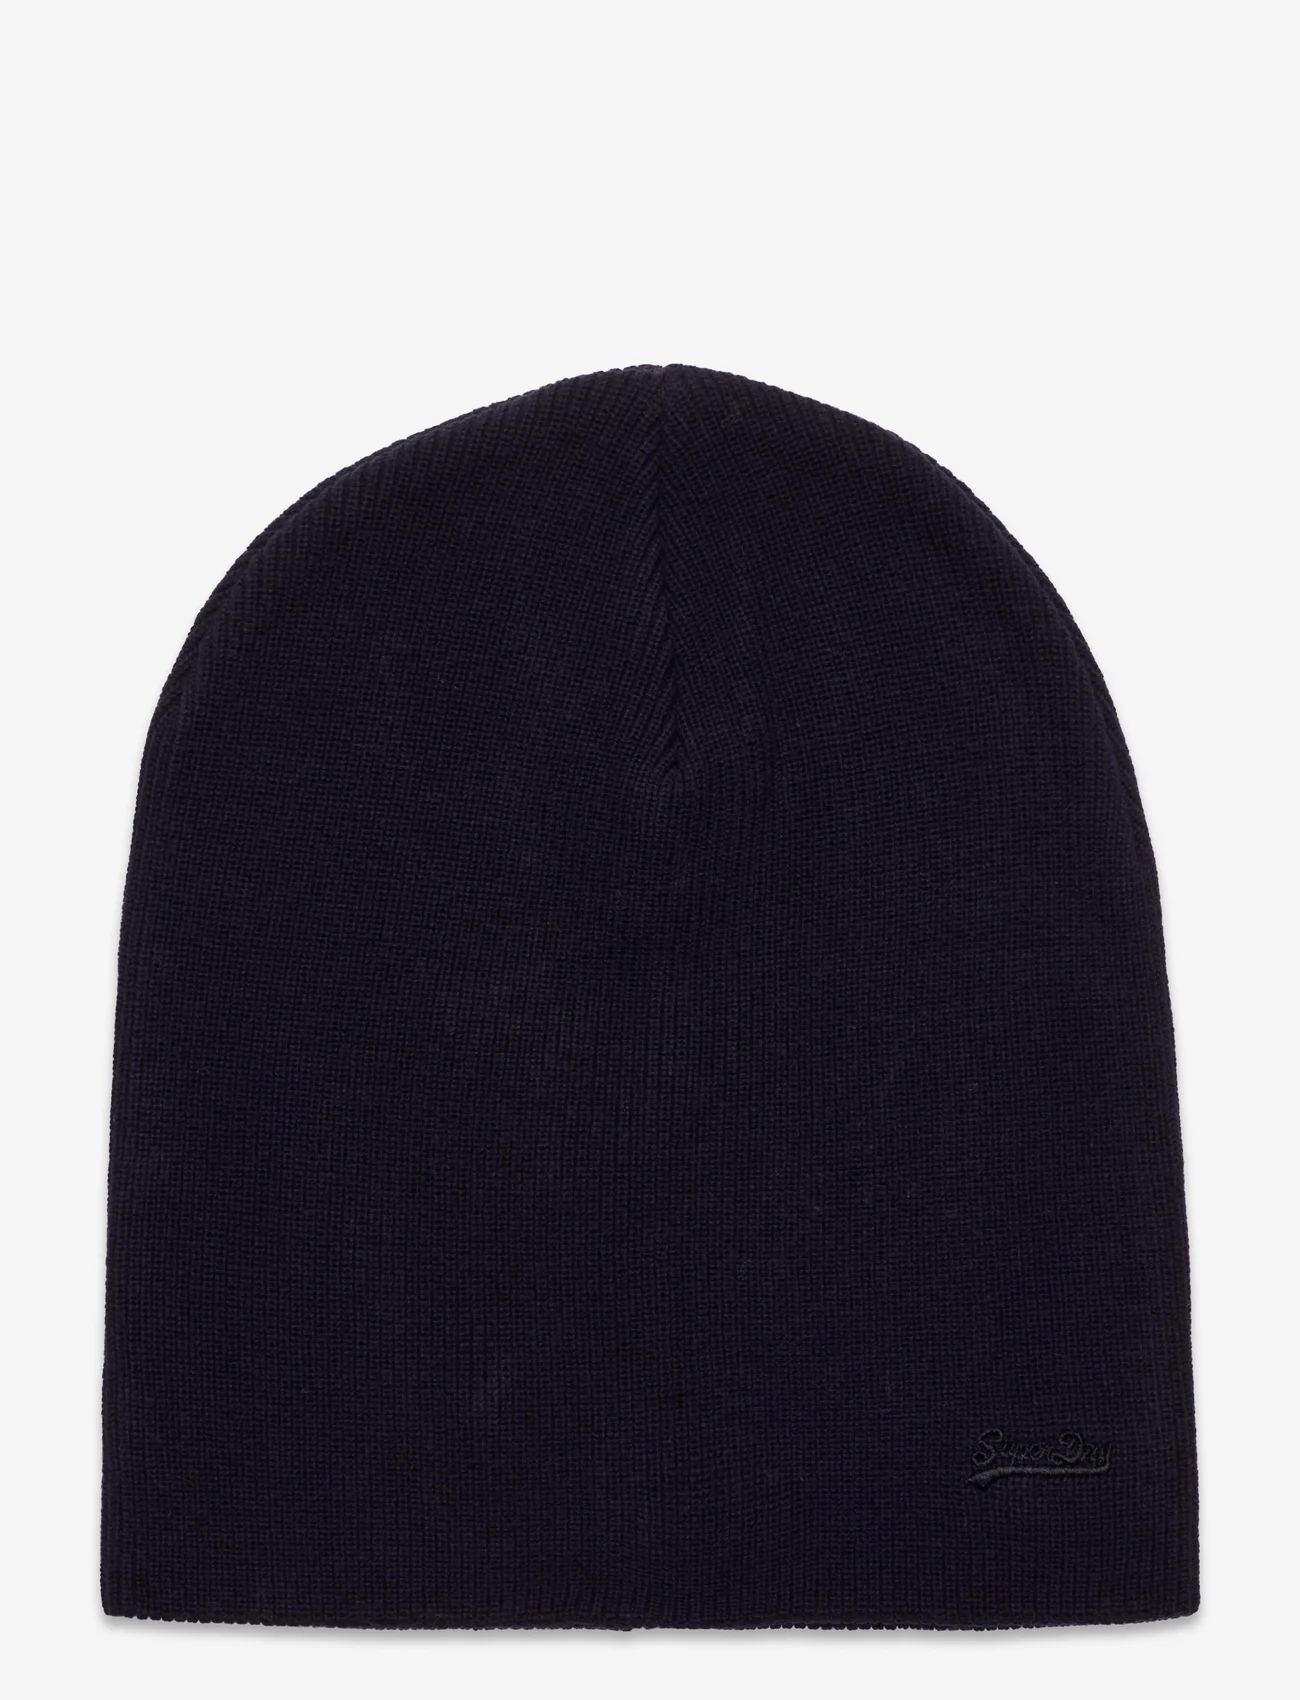 Superdry - KNITTED LOGO BEANIE HAT - mažiausios kainos - eclipse navy grit - 0